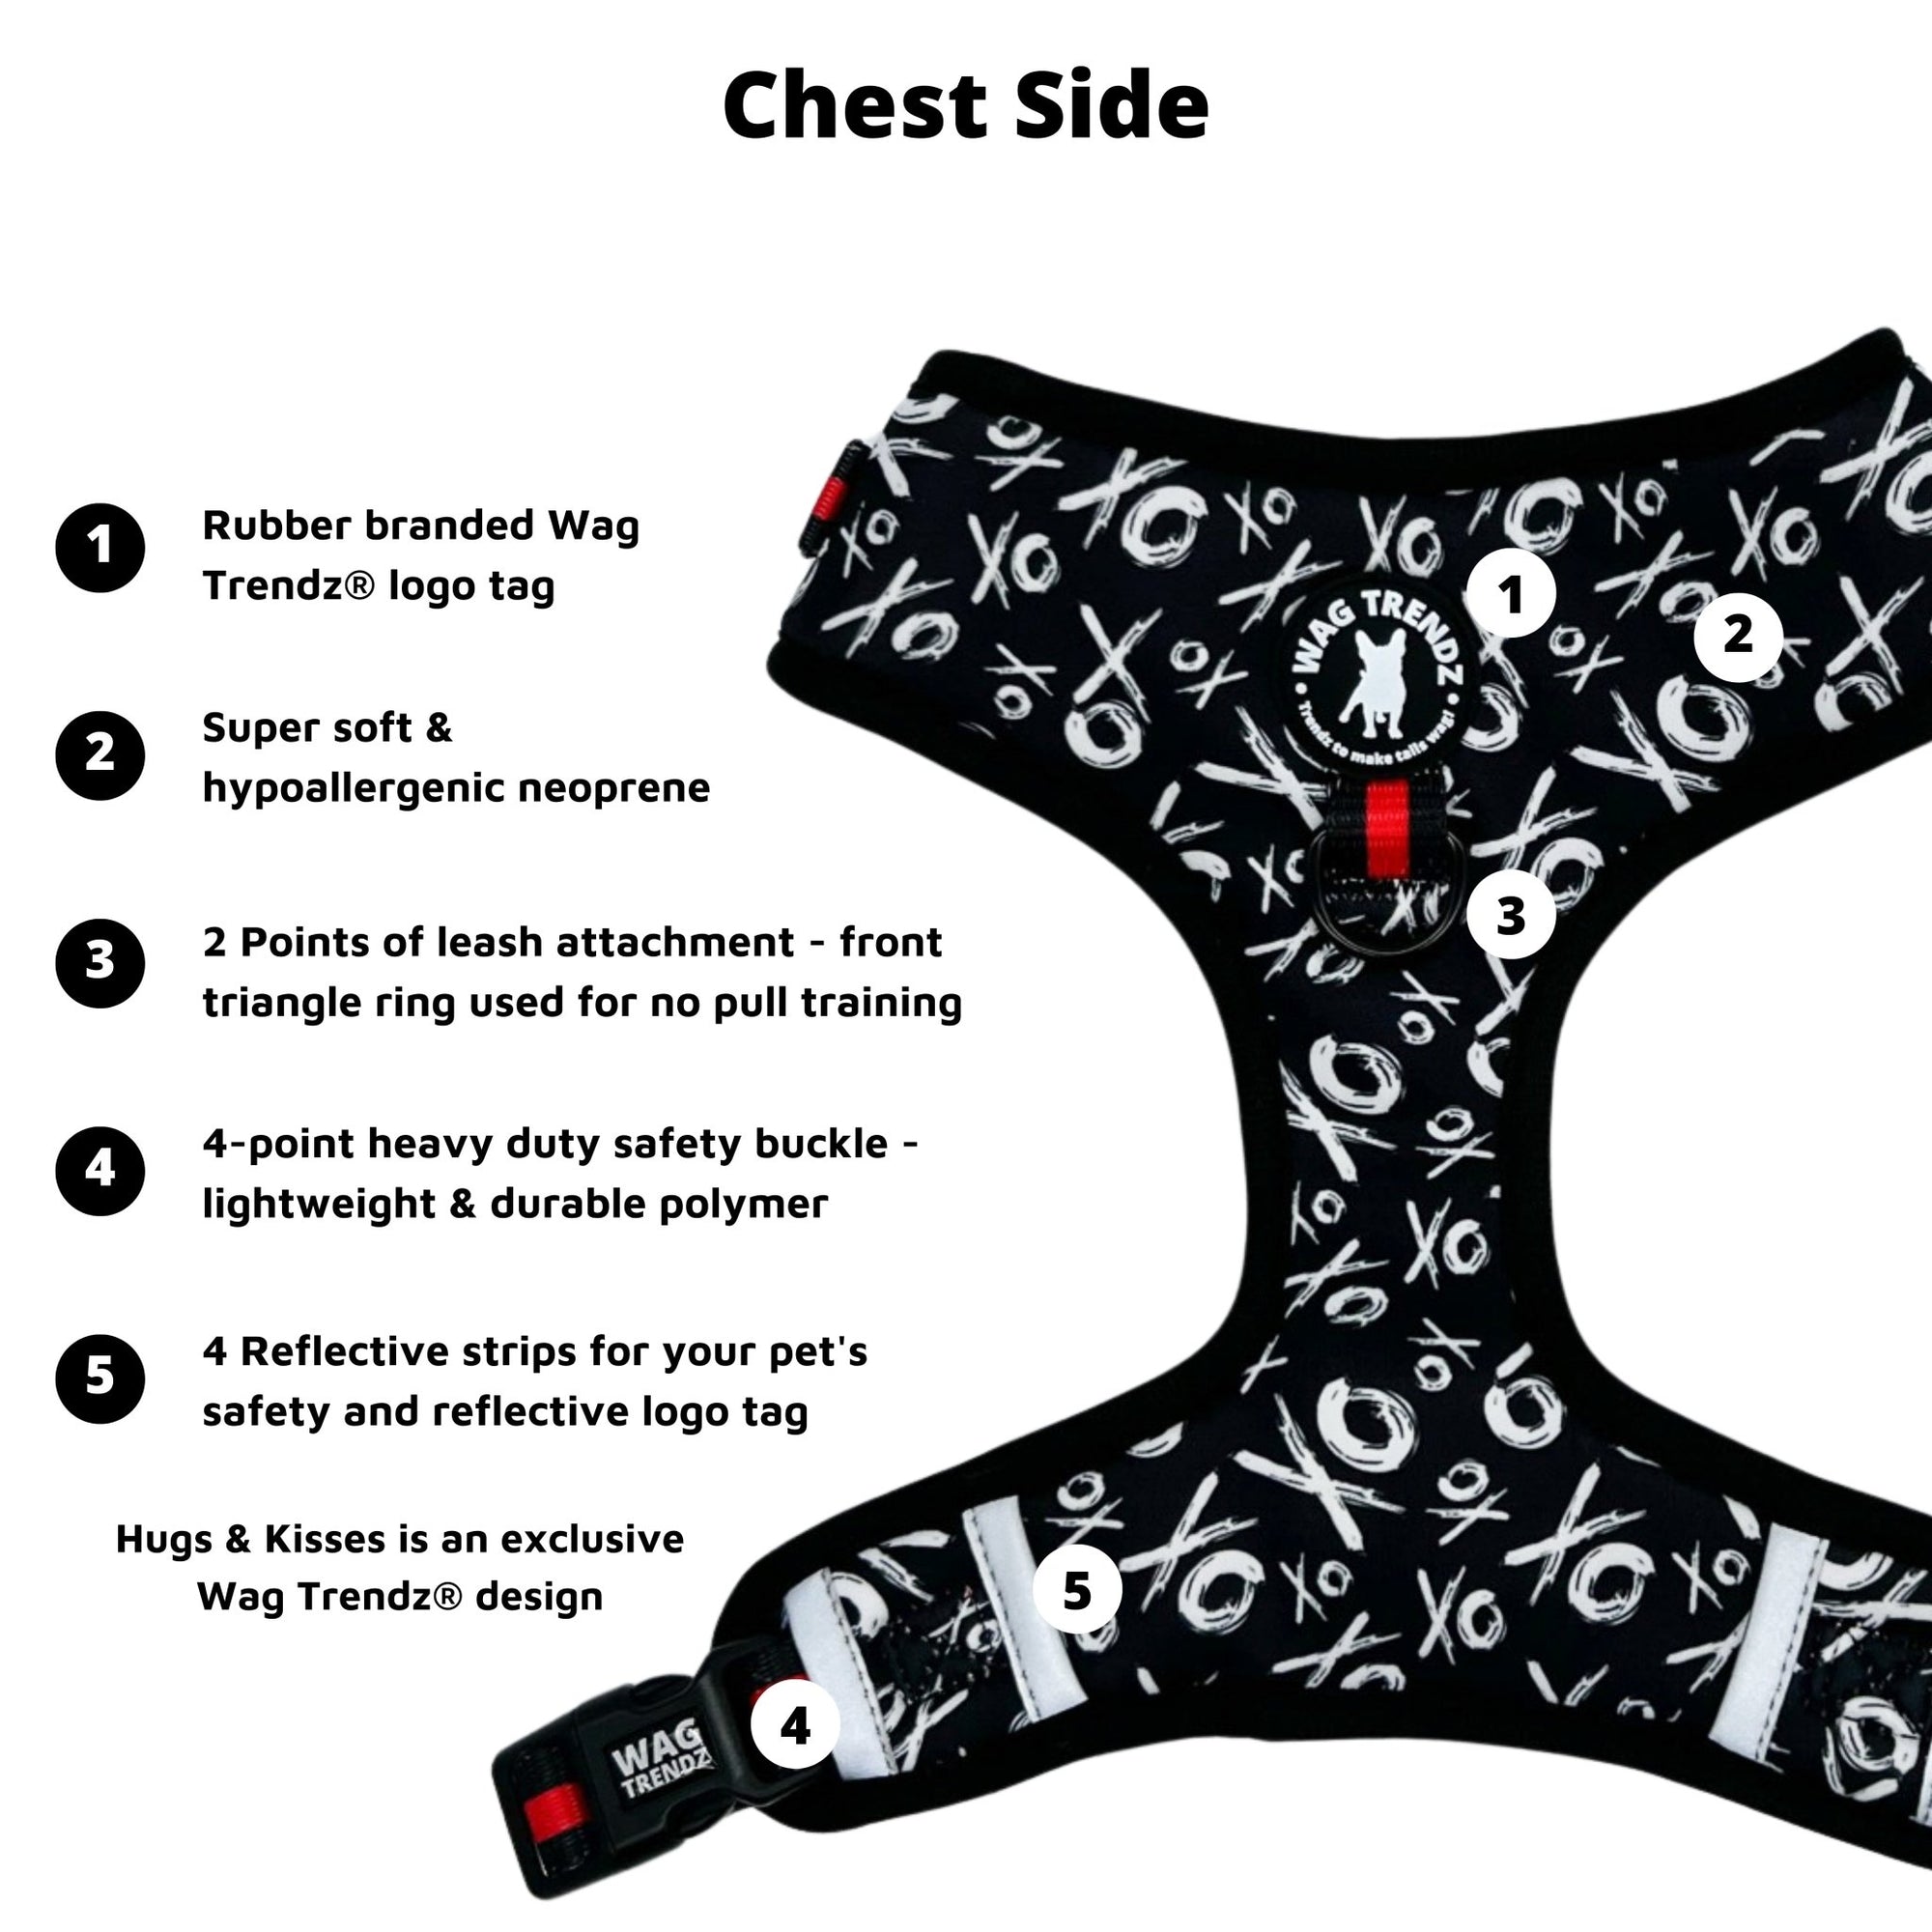 Dog Collar Harness and Leash Set - Dog Harness Vest in black and white XO&#39;s with bold red accents - product feature captions - chest side - against solid white background - Wag Trendz